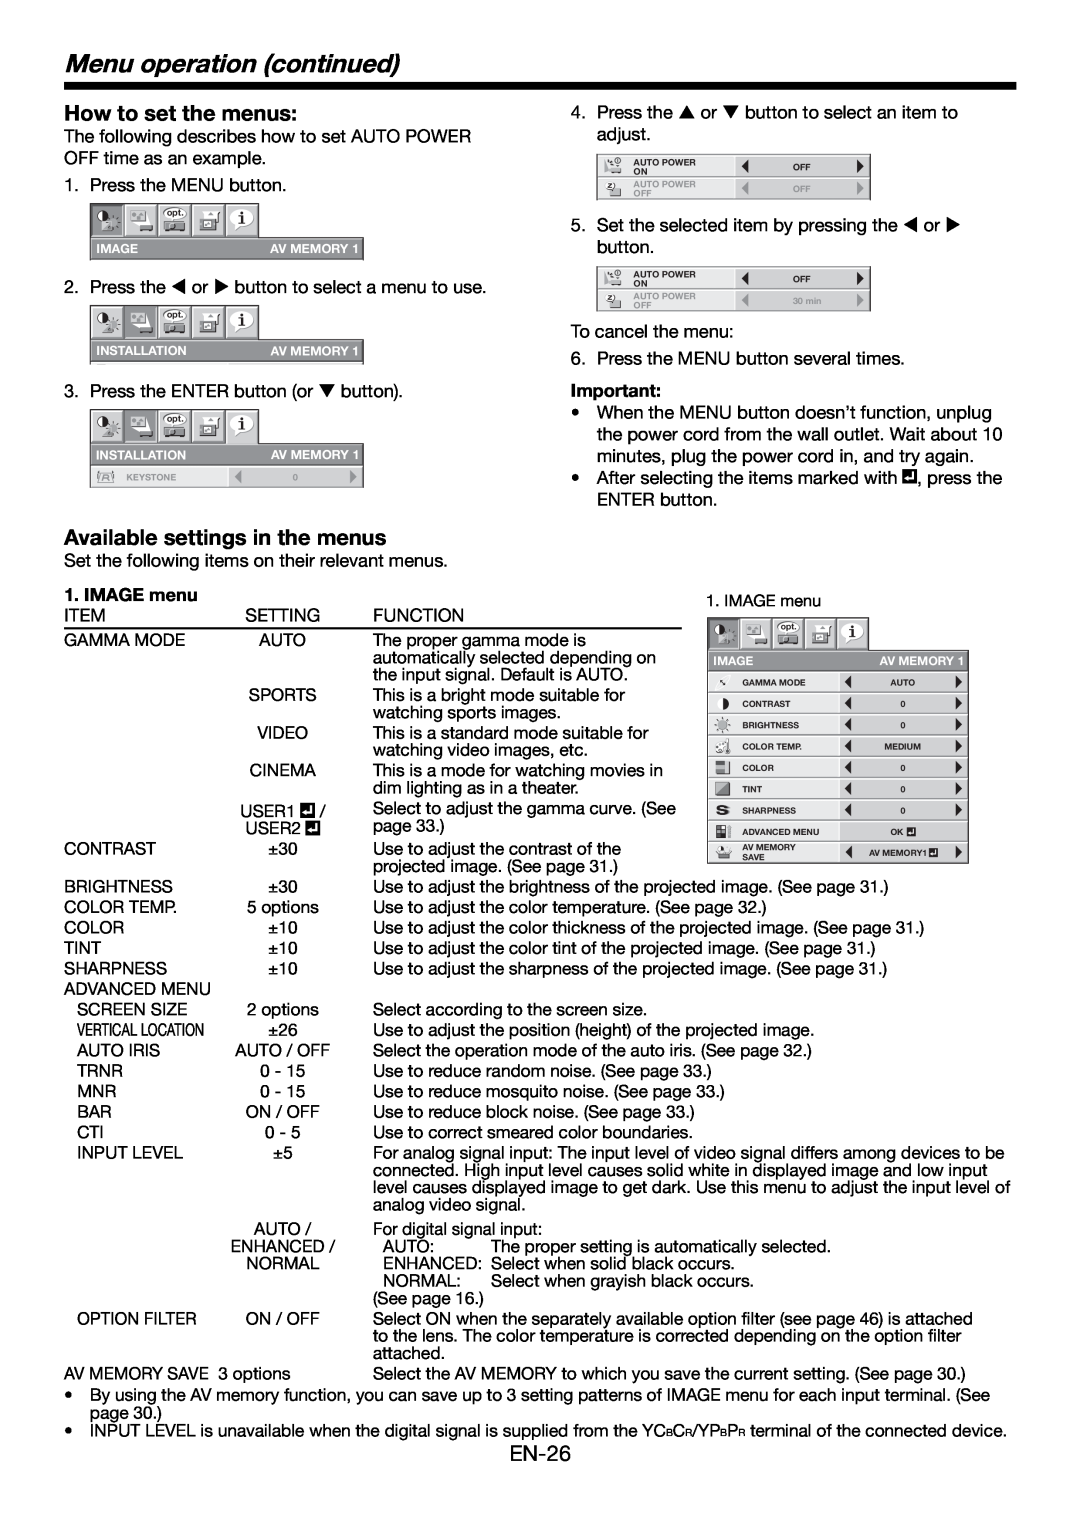 Mitsubishi Electronics HC6000 Menu operation continued, How to set the menus, Available settings in the menus, IMAGE menu 